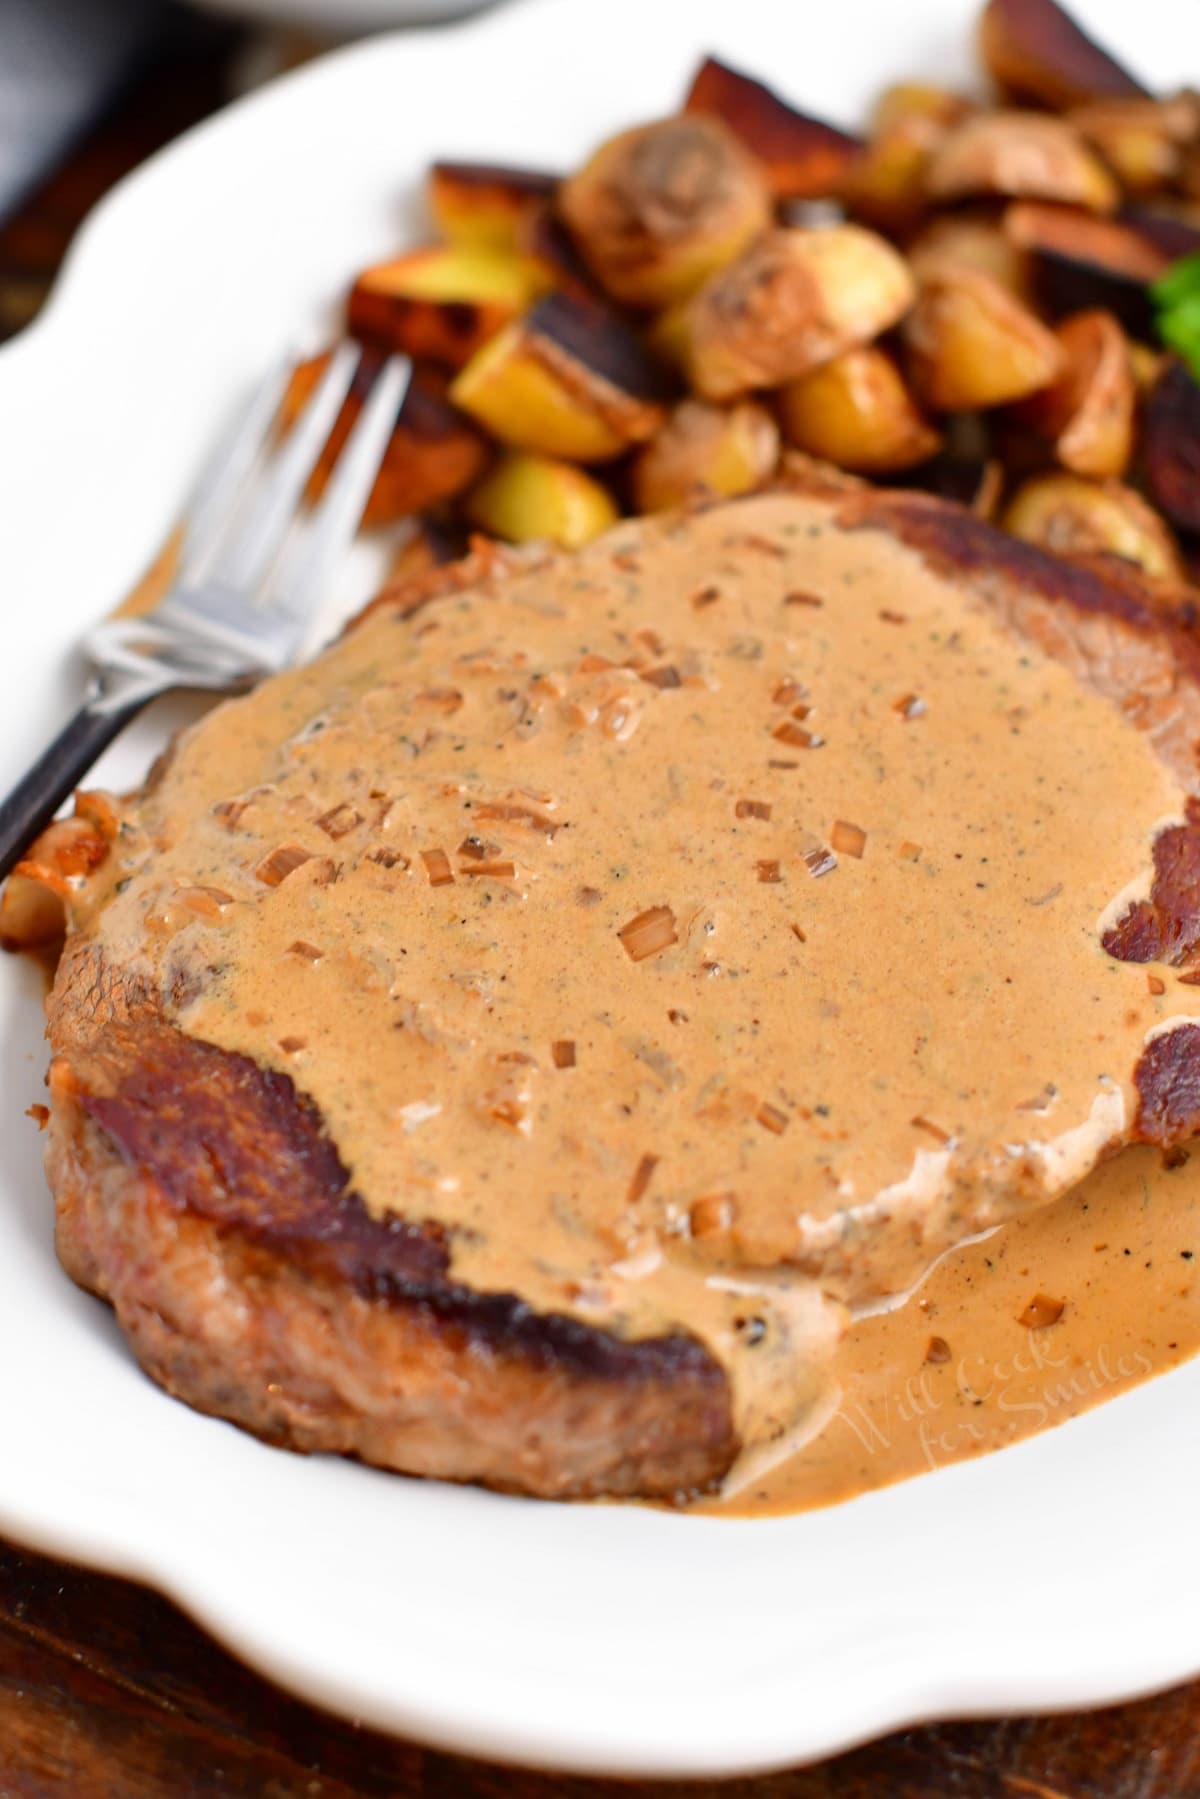 ribeye smothered in peppercorn sauce with roasted potatoes